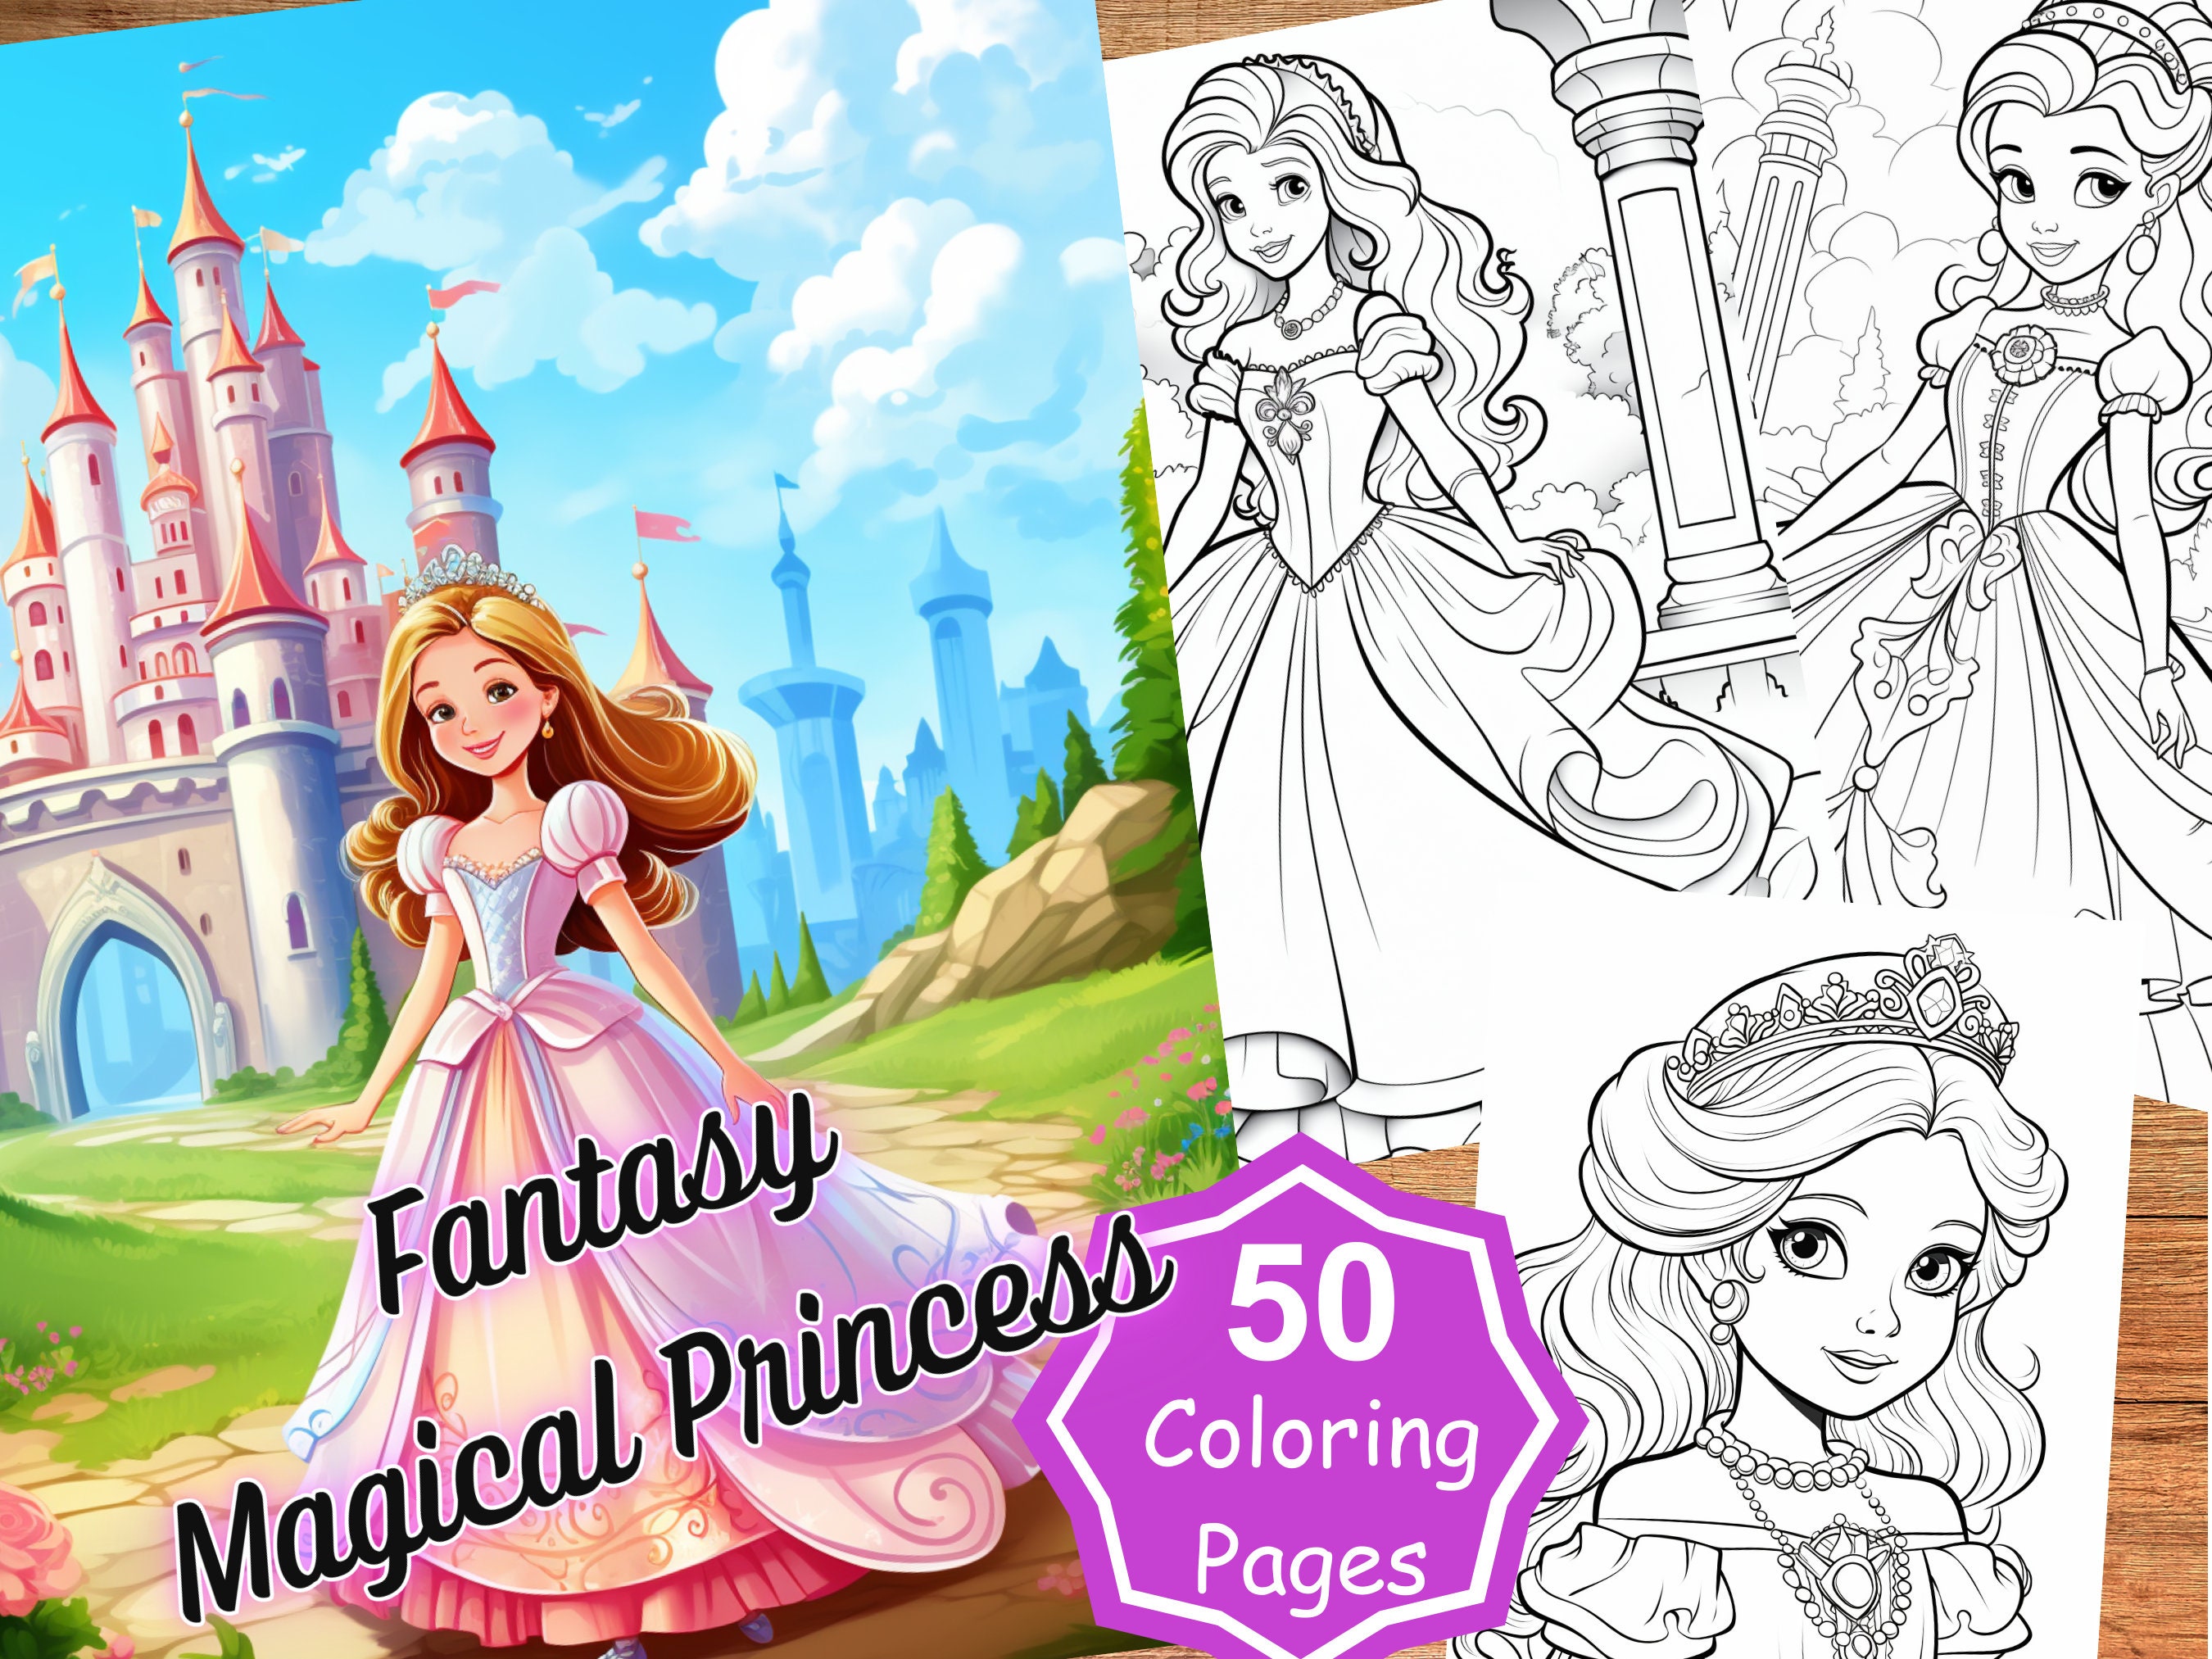 Princess Coloring Book Pages, Variety of Princess Coloring Pages for Girls,  Girl Princesses & Animal Princesses, Printable Princess Coloring 